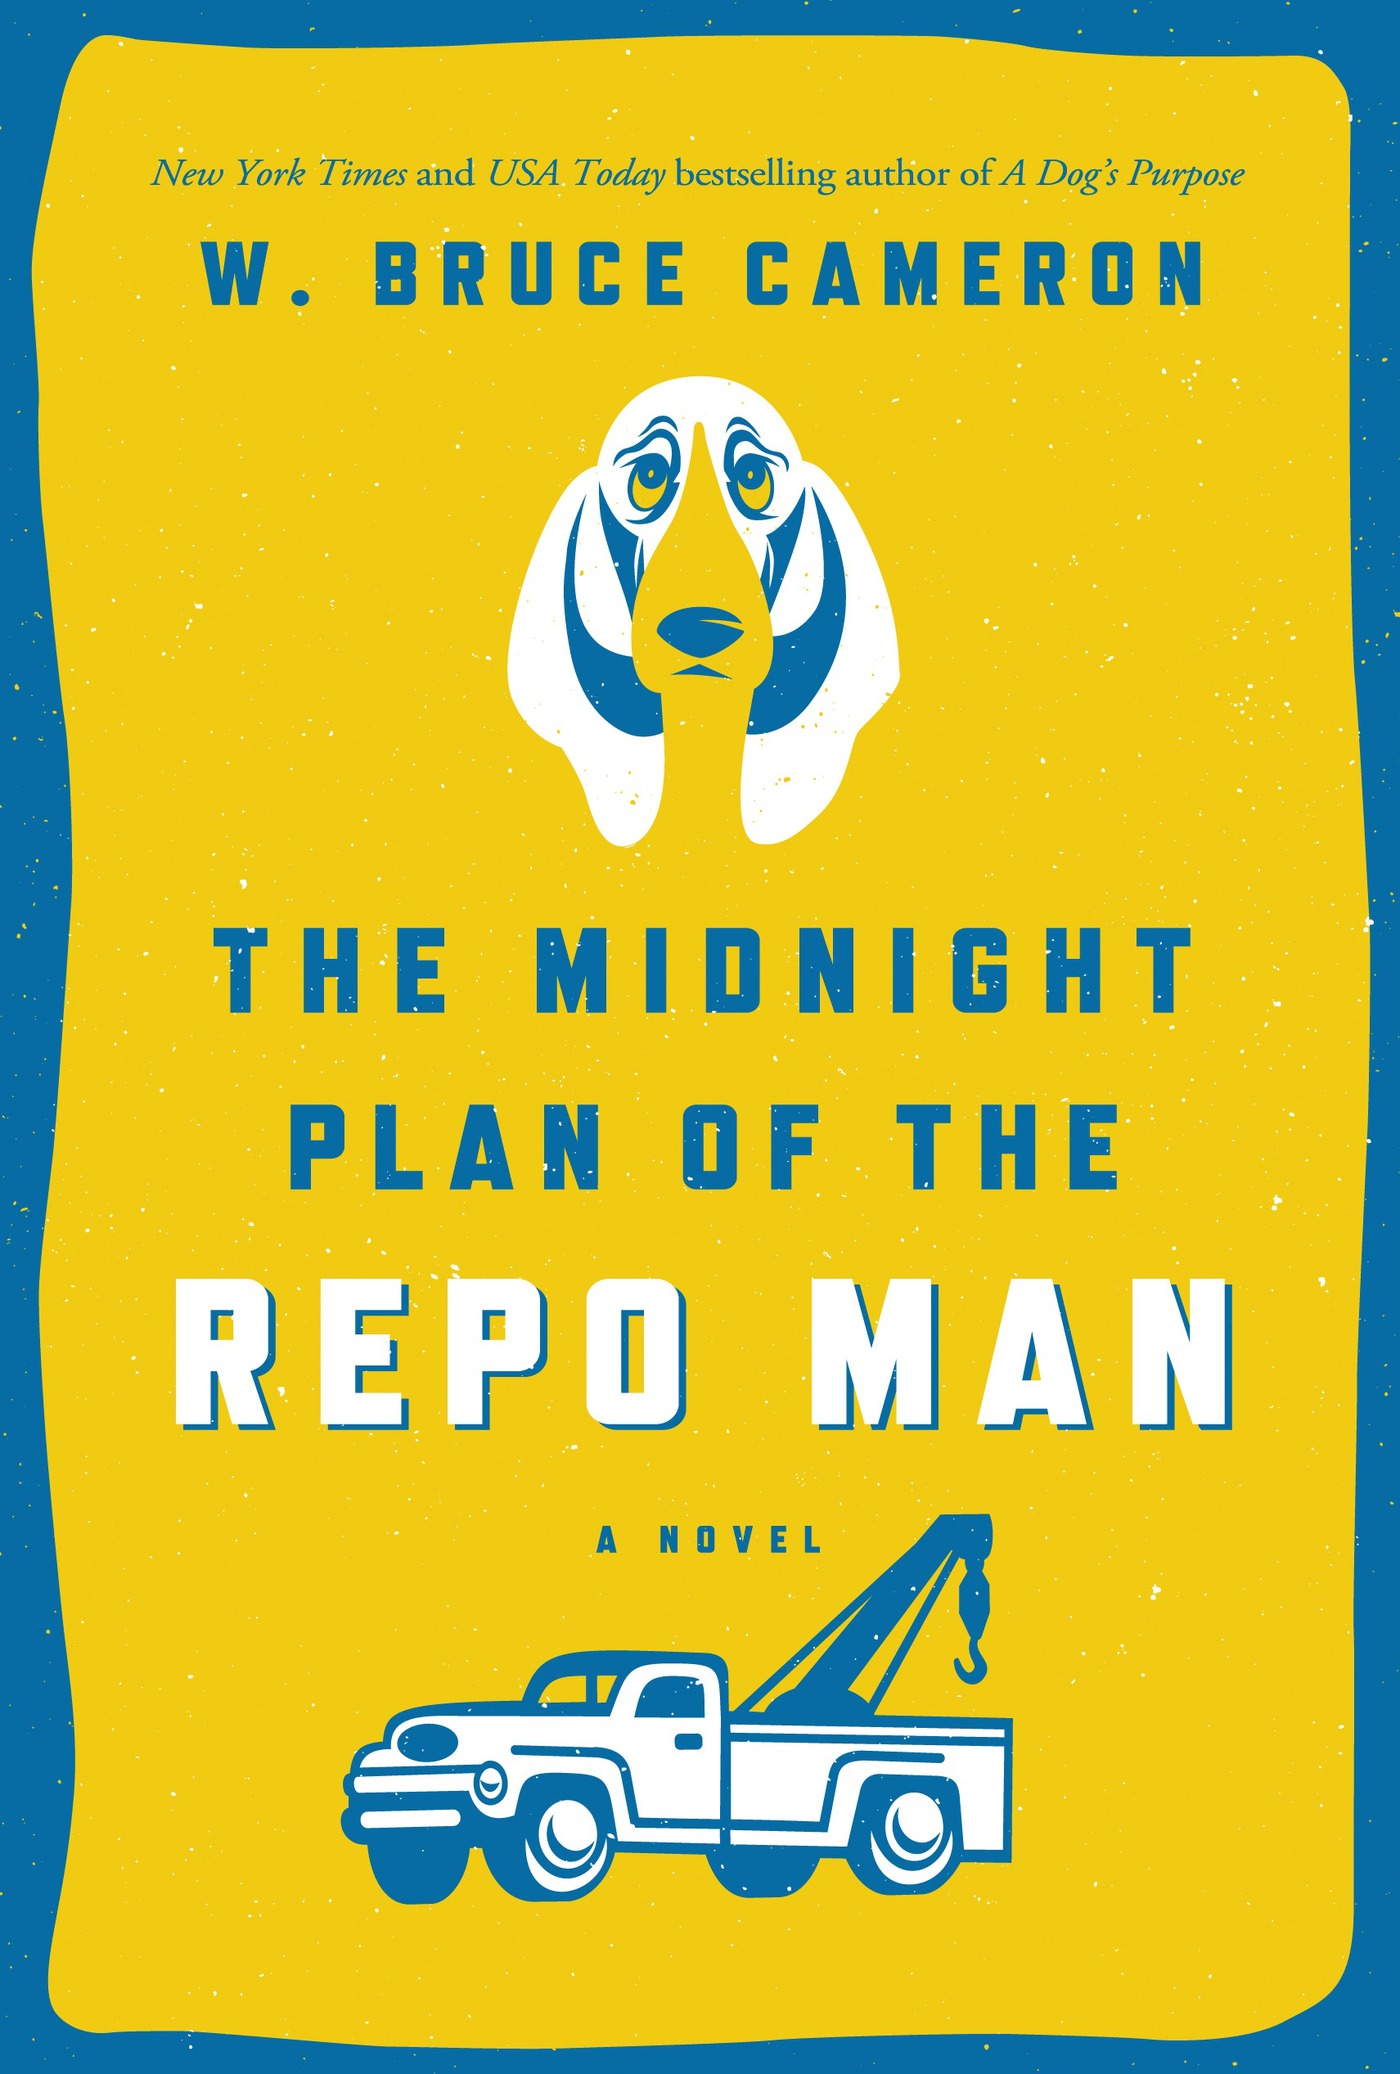 The Midnight Plan of the Repo Man : A Novel by W. Bruce Cameron